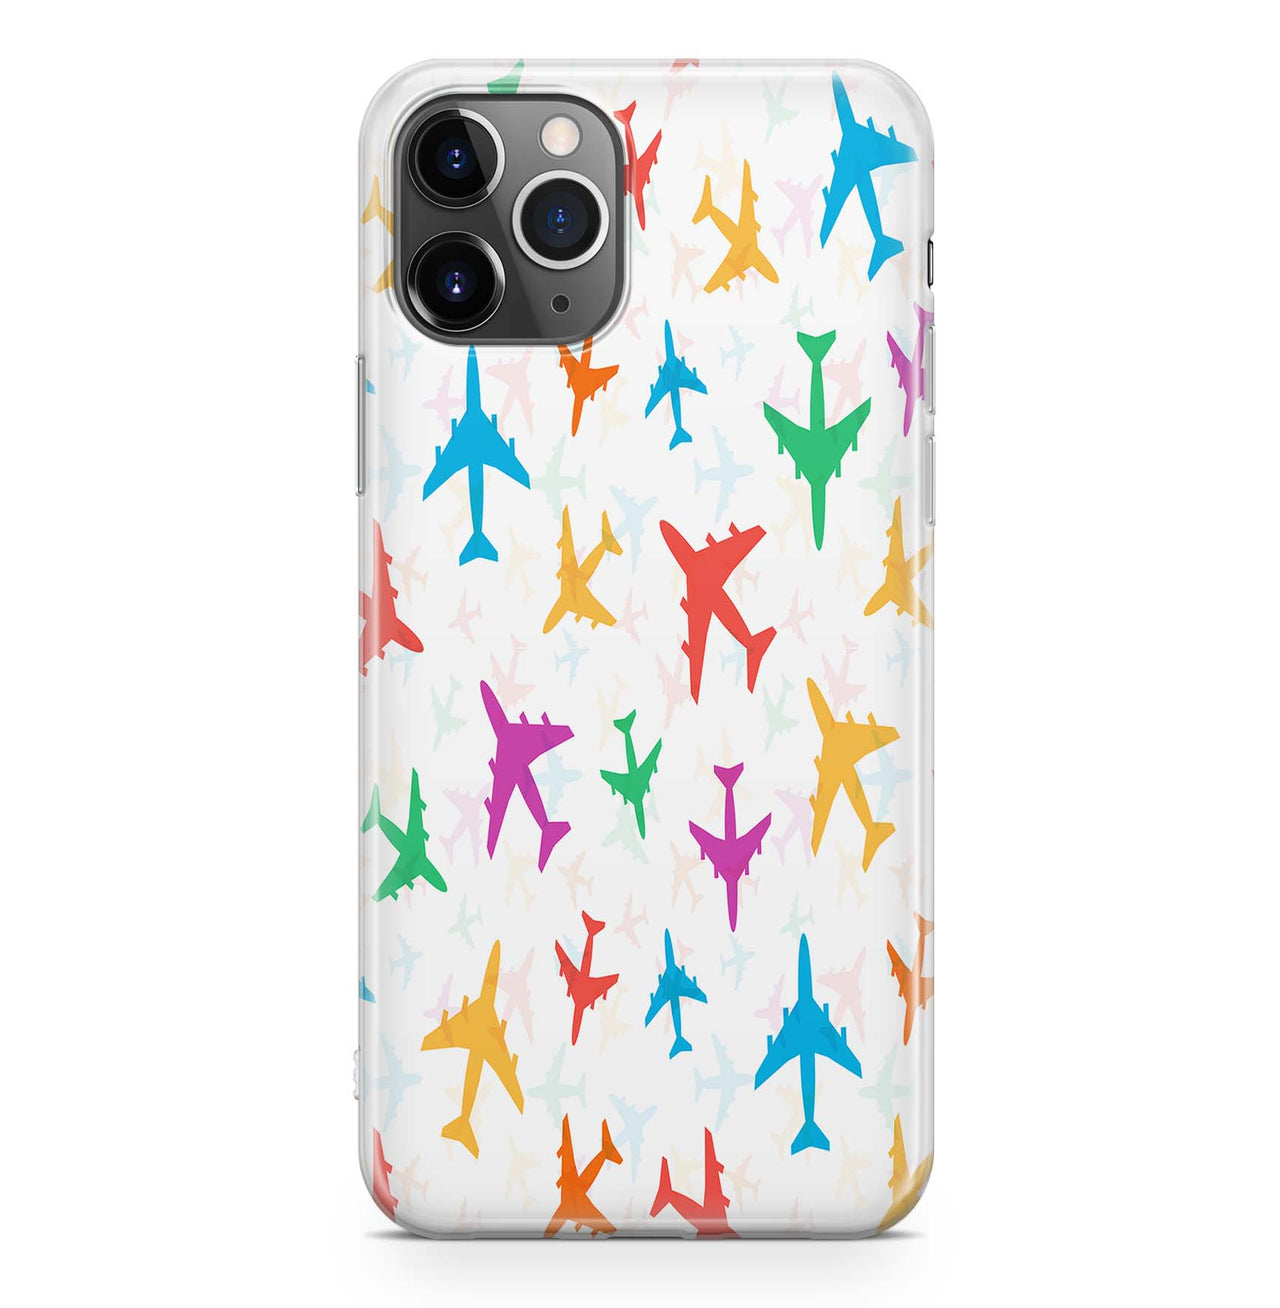 Cheerful Seamless Airplanes Designed iPhone Cases